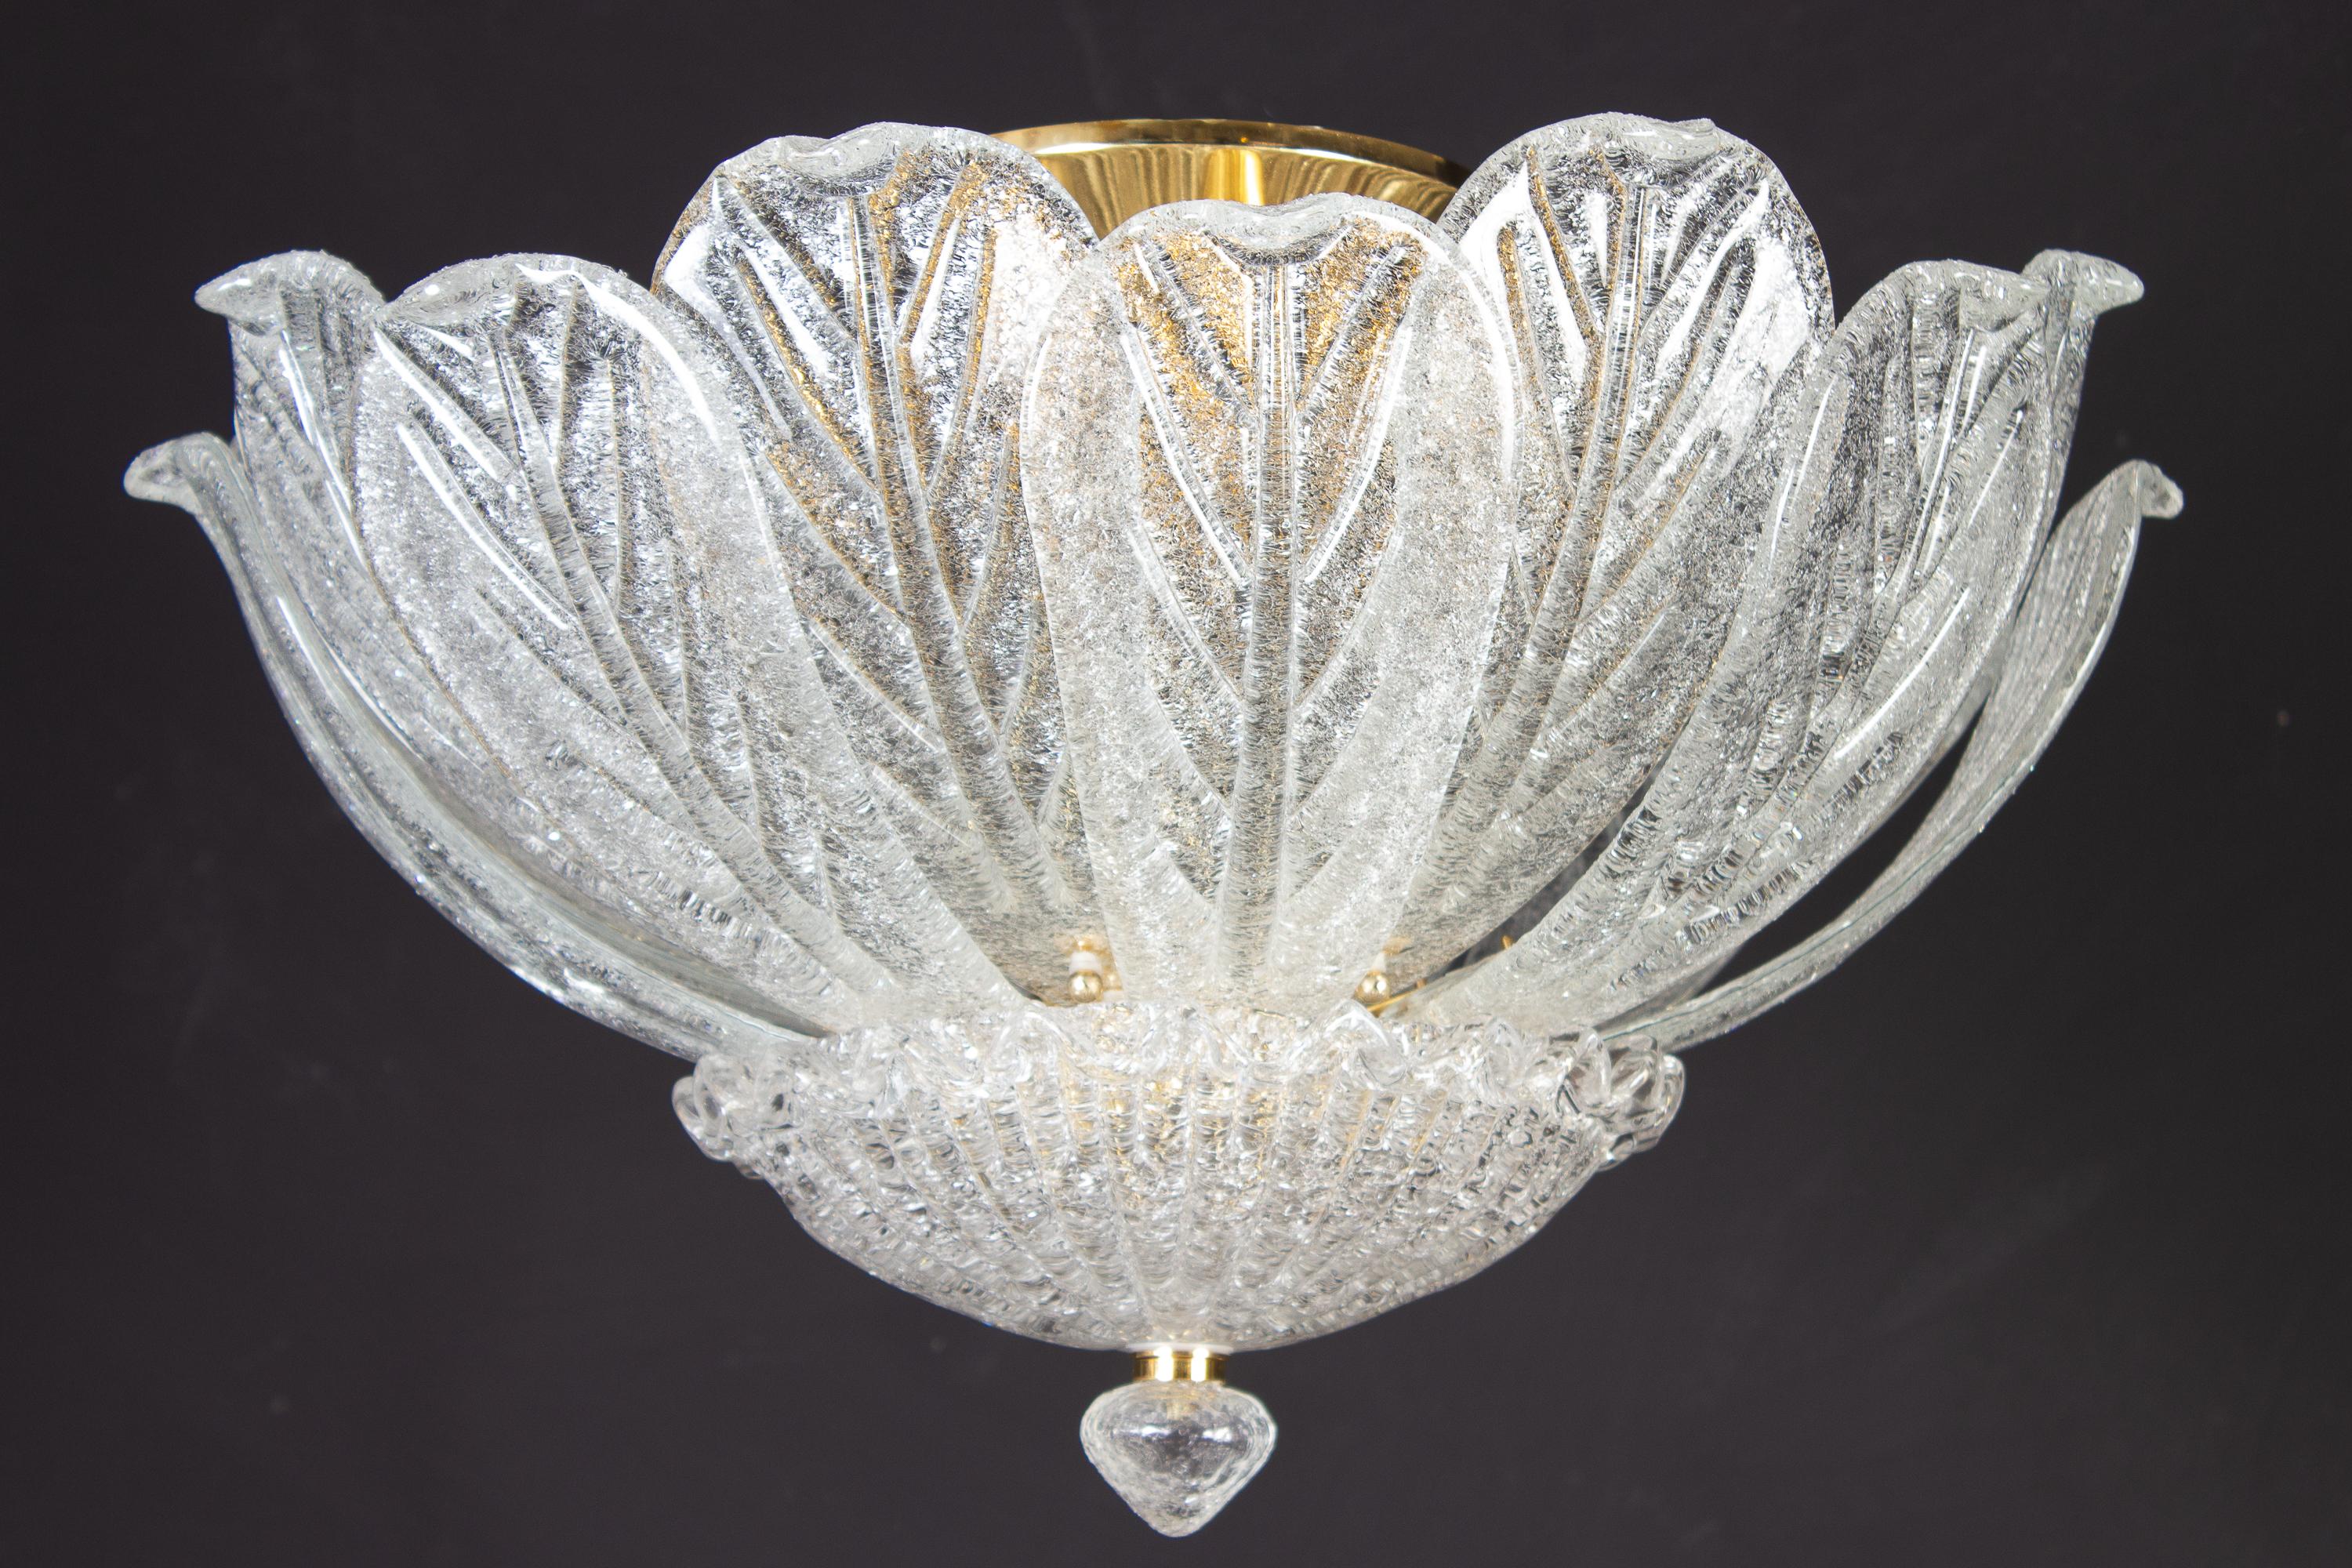 Realized in pure Murano glass leaves. The structure is gilt-metal. Five E 14 lights spread a magical light.
Available 6 of this Item.
Measures: Diameter 60 cm, height 35 cm without the chain.